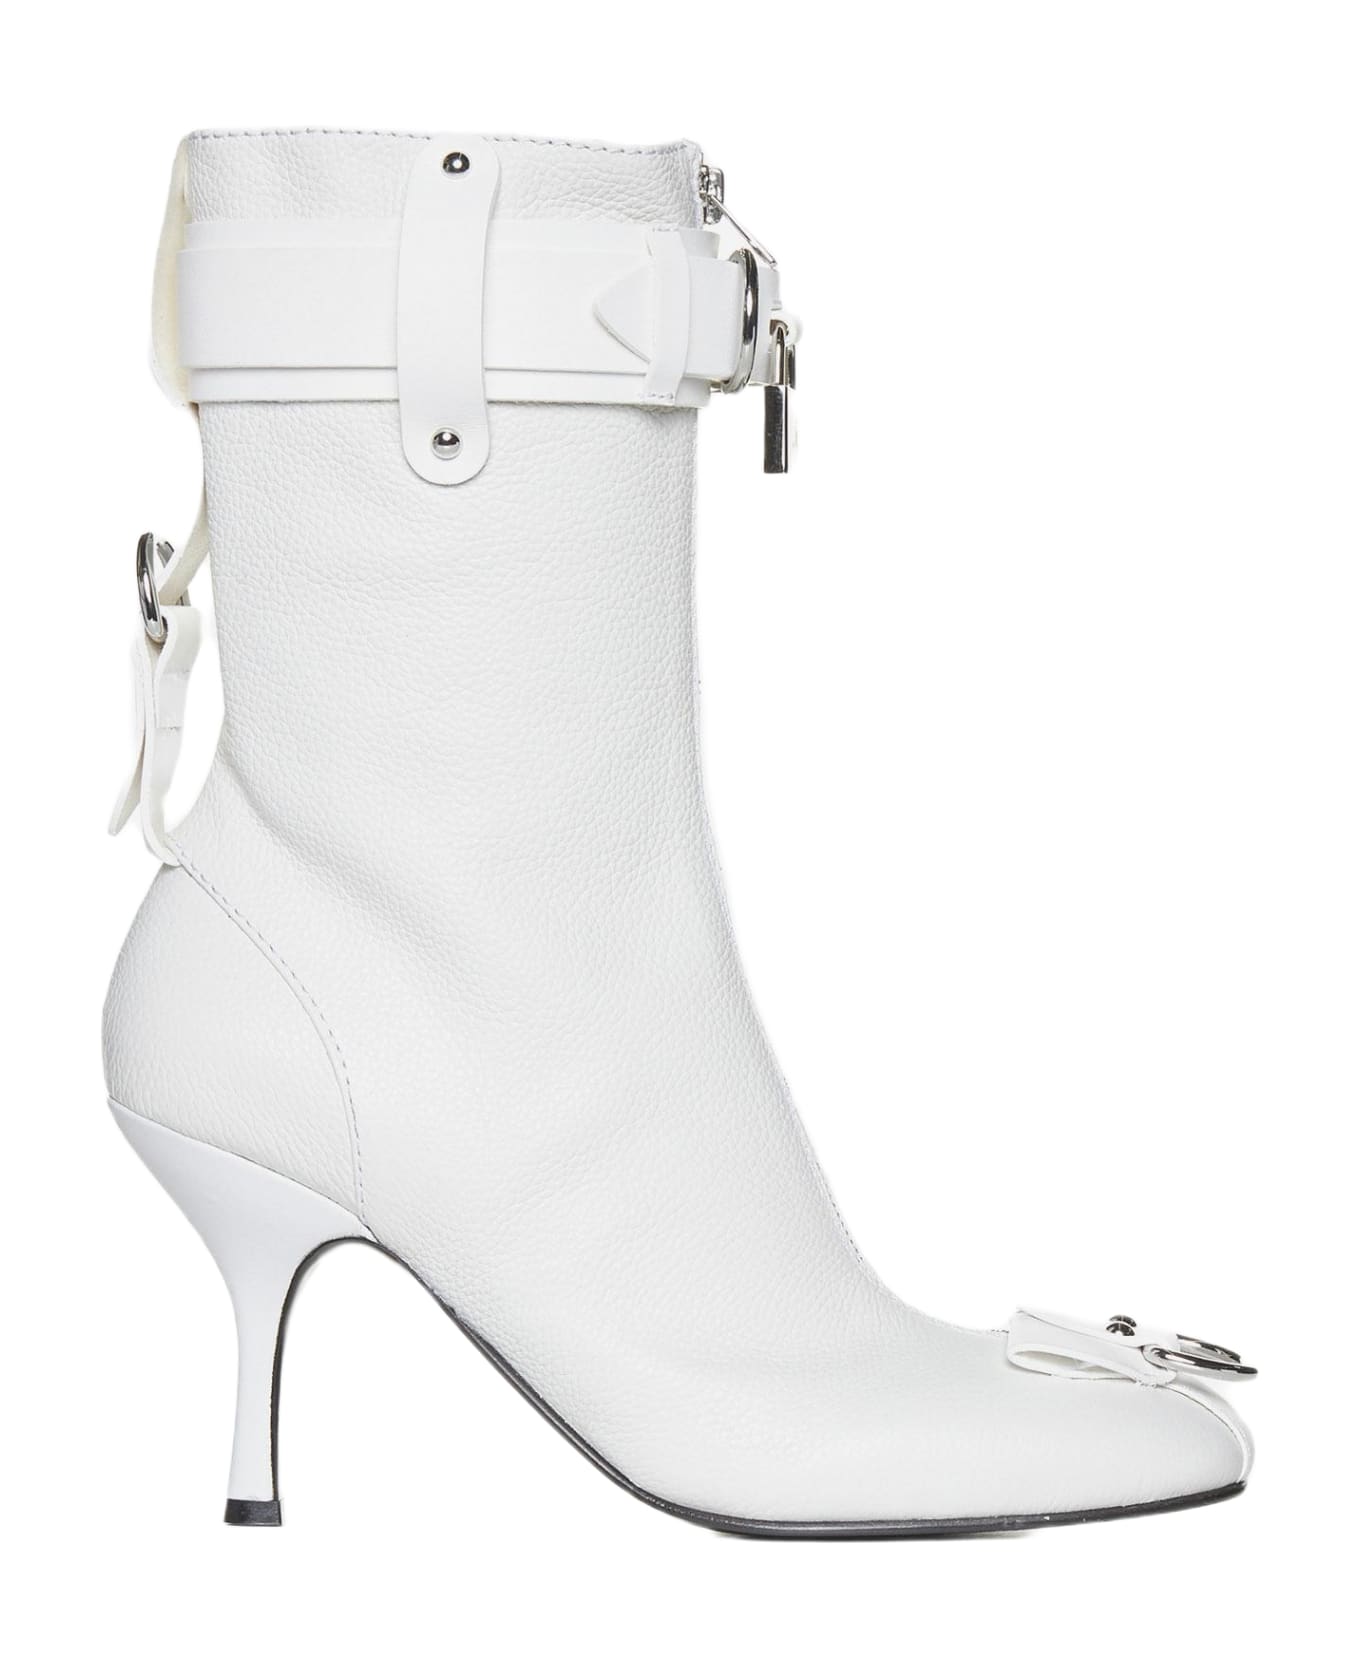 J.W. Anderson Punk Leather Ankle Boots - White